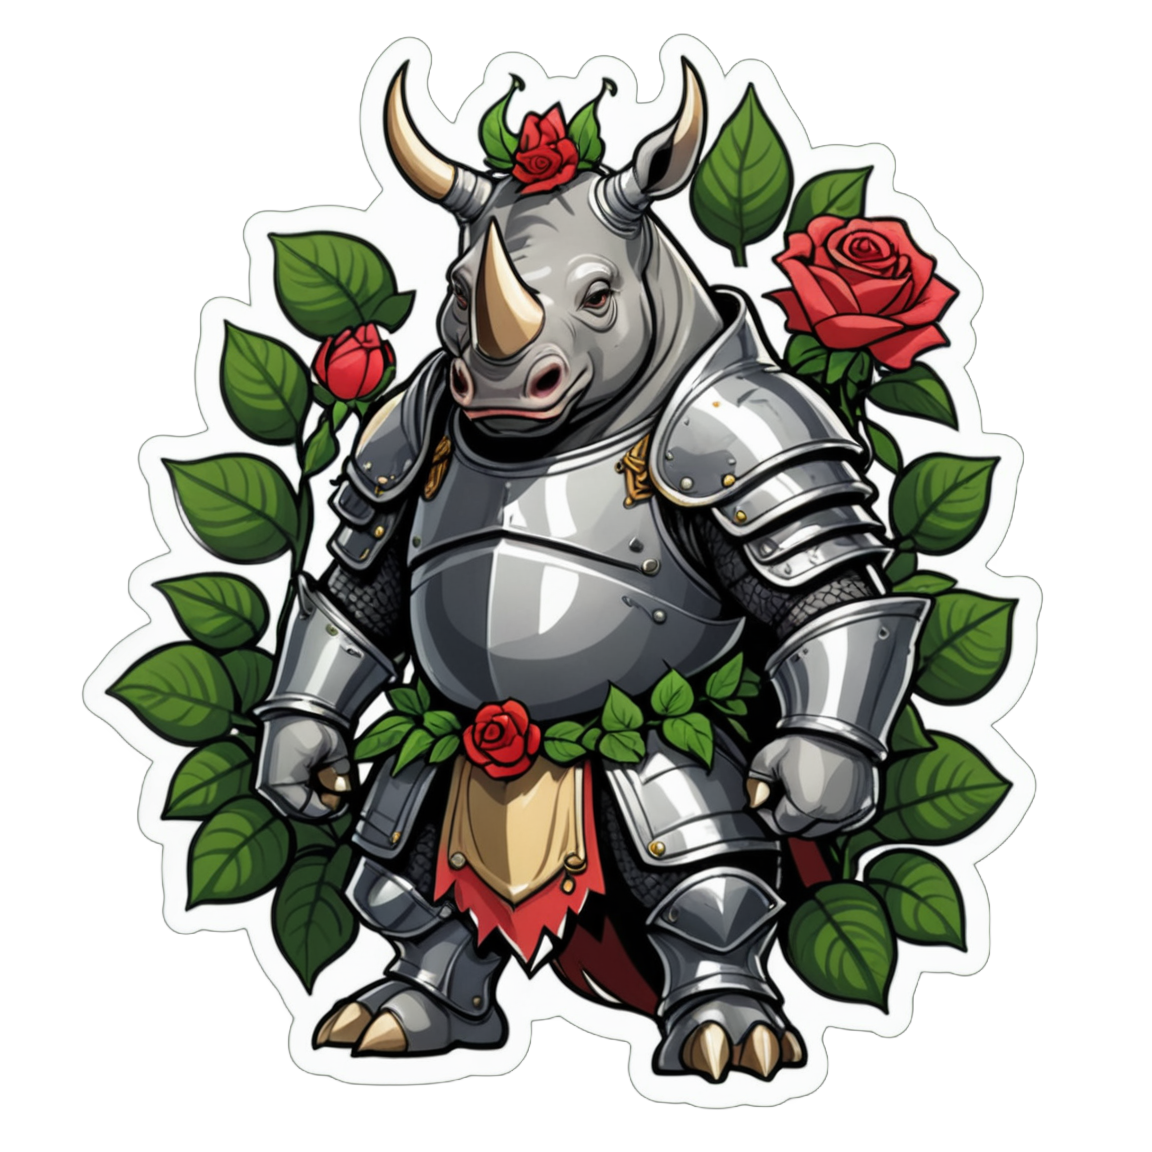 A rhinoceros adorned in botanical-themed knight armor, with rose thorns and green vines, poised for battle